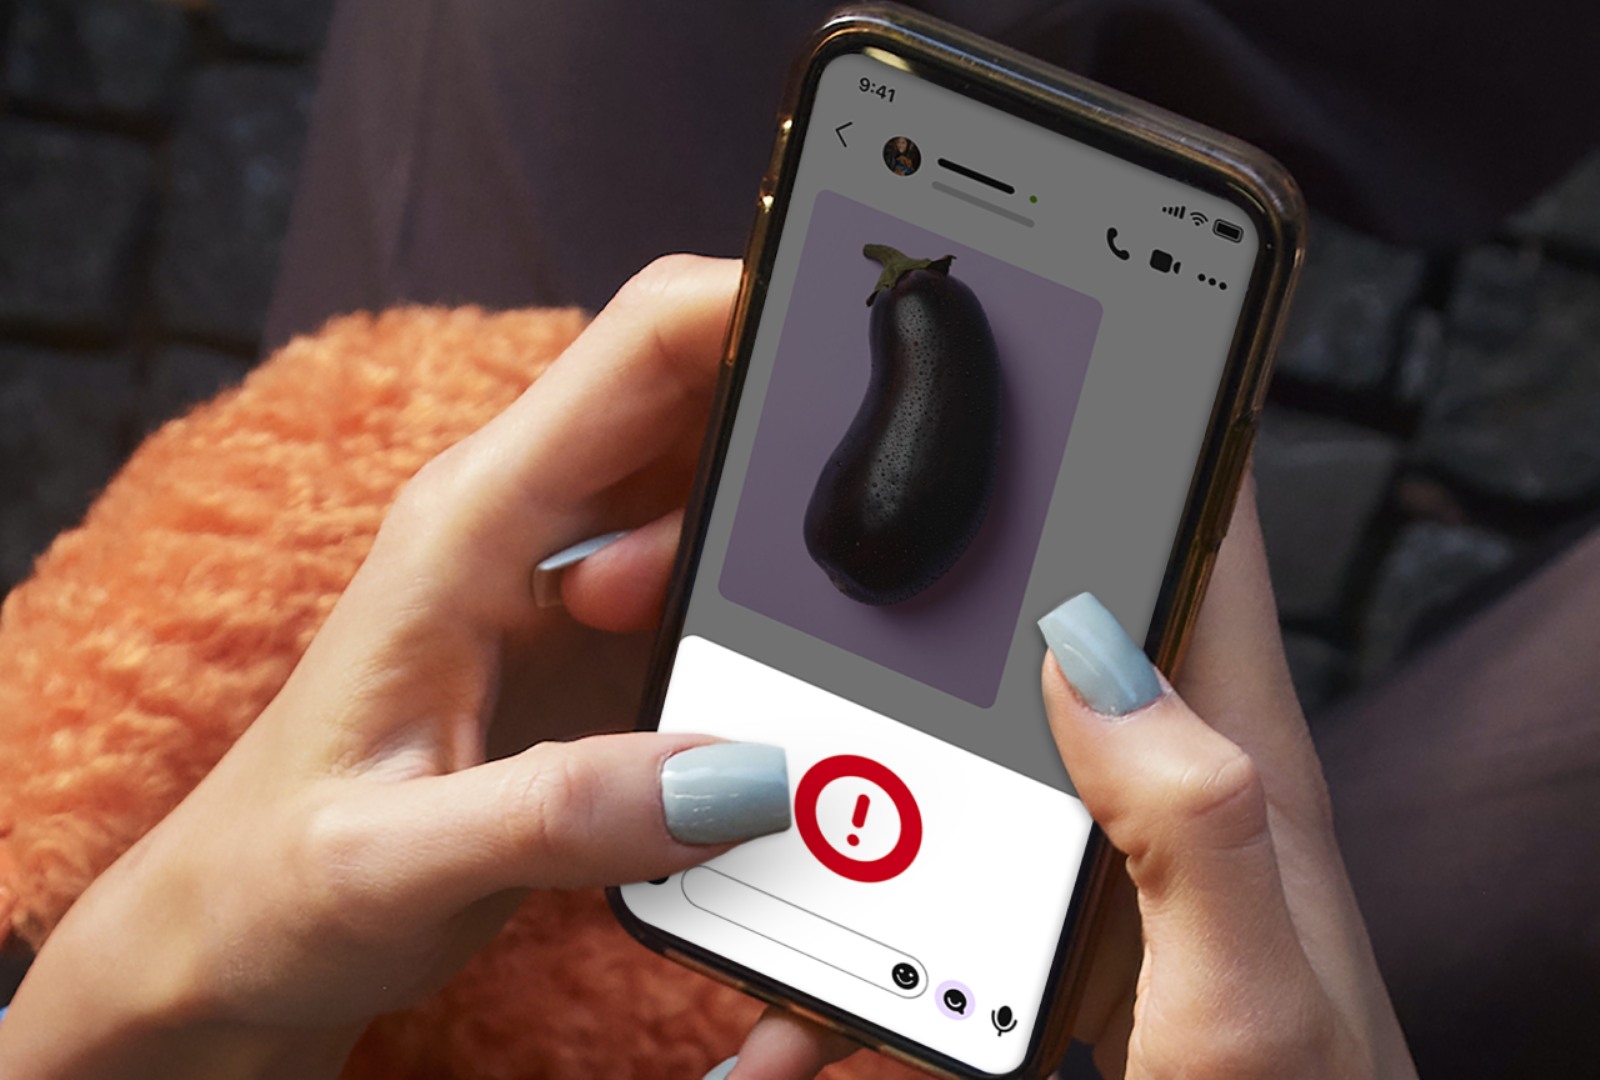 With Badoo’s Private Detector, You Have Control Over Unsolicited Nudes